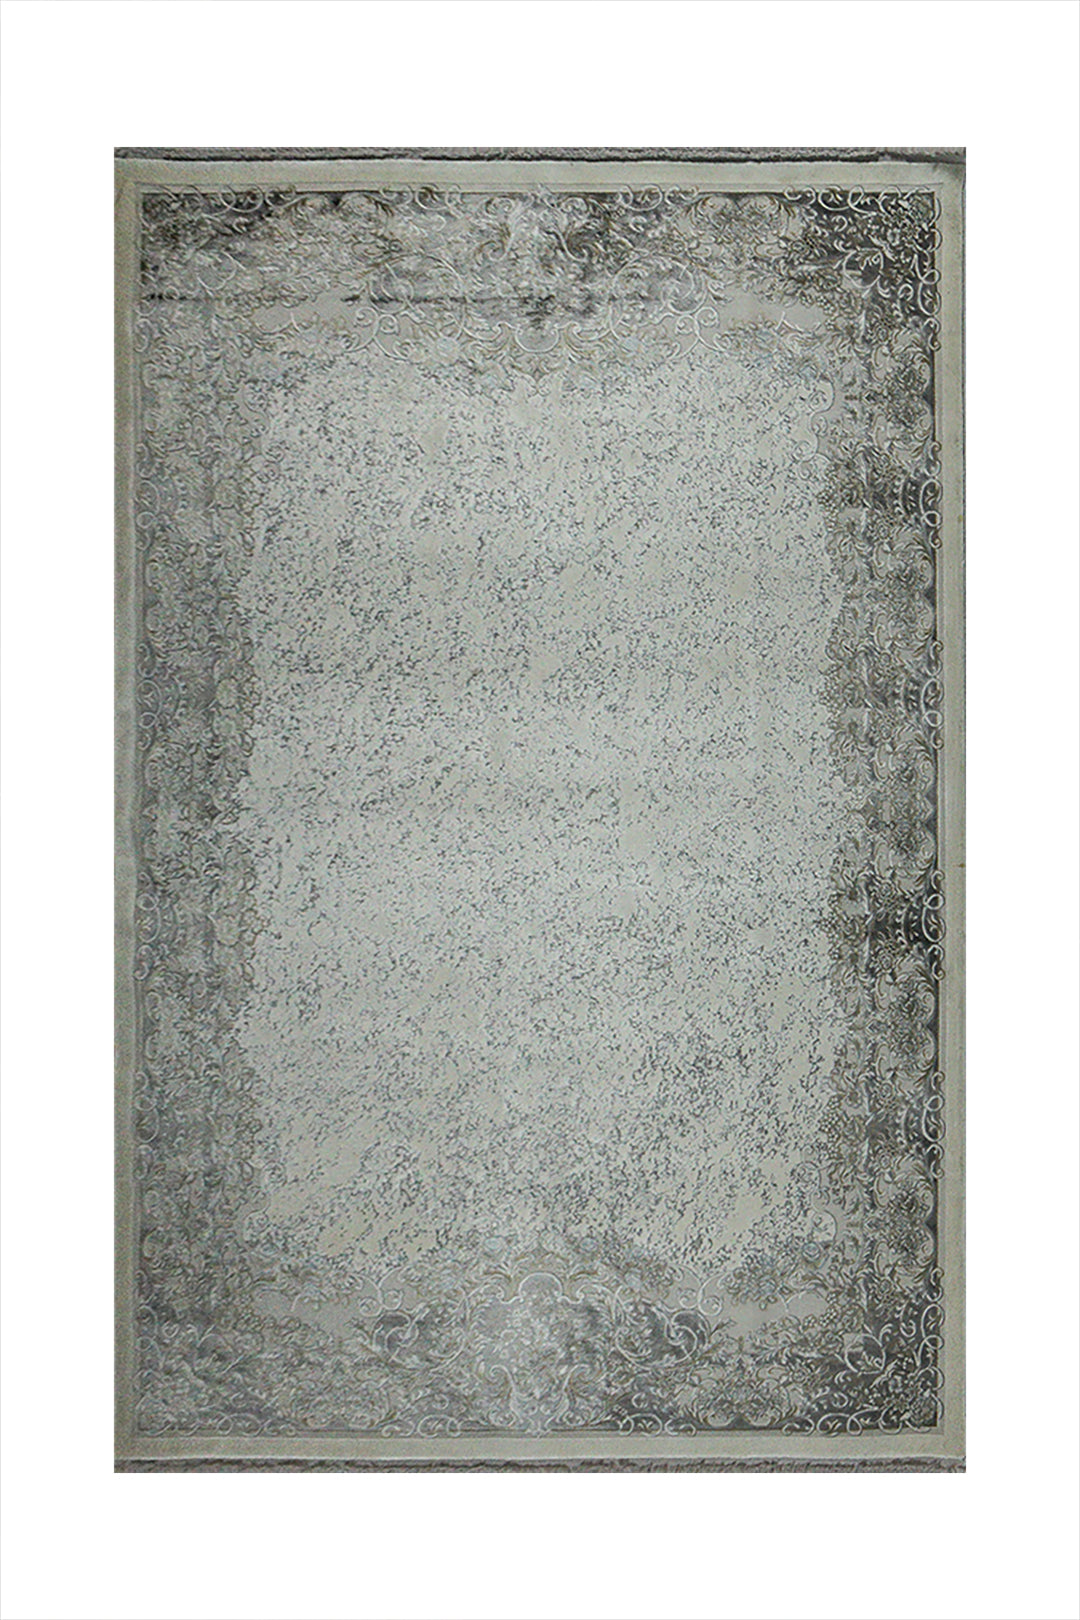 Turkish Premium Quality Voyage Rug - 5.2 x 7.5 FT - Cream - Resilient Construction for Long-Lasting Use